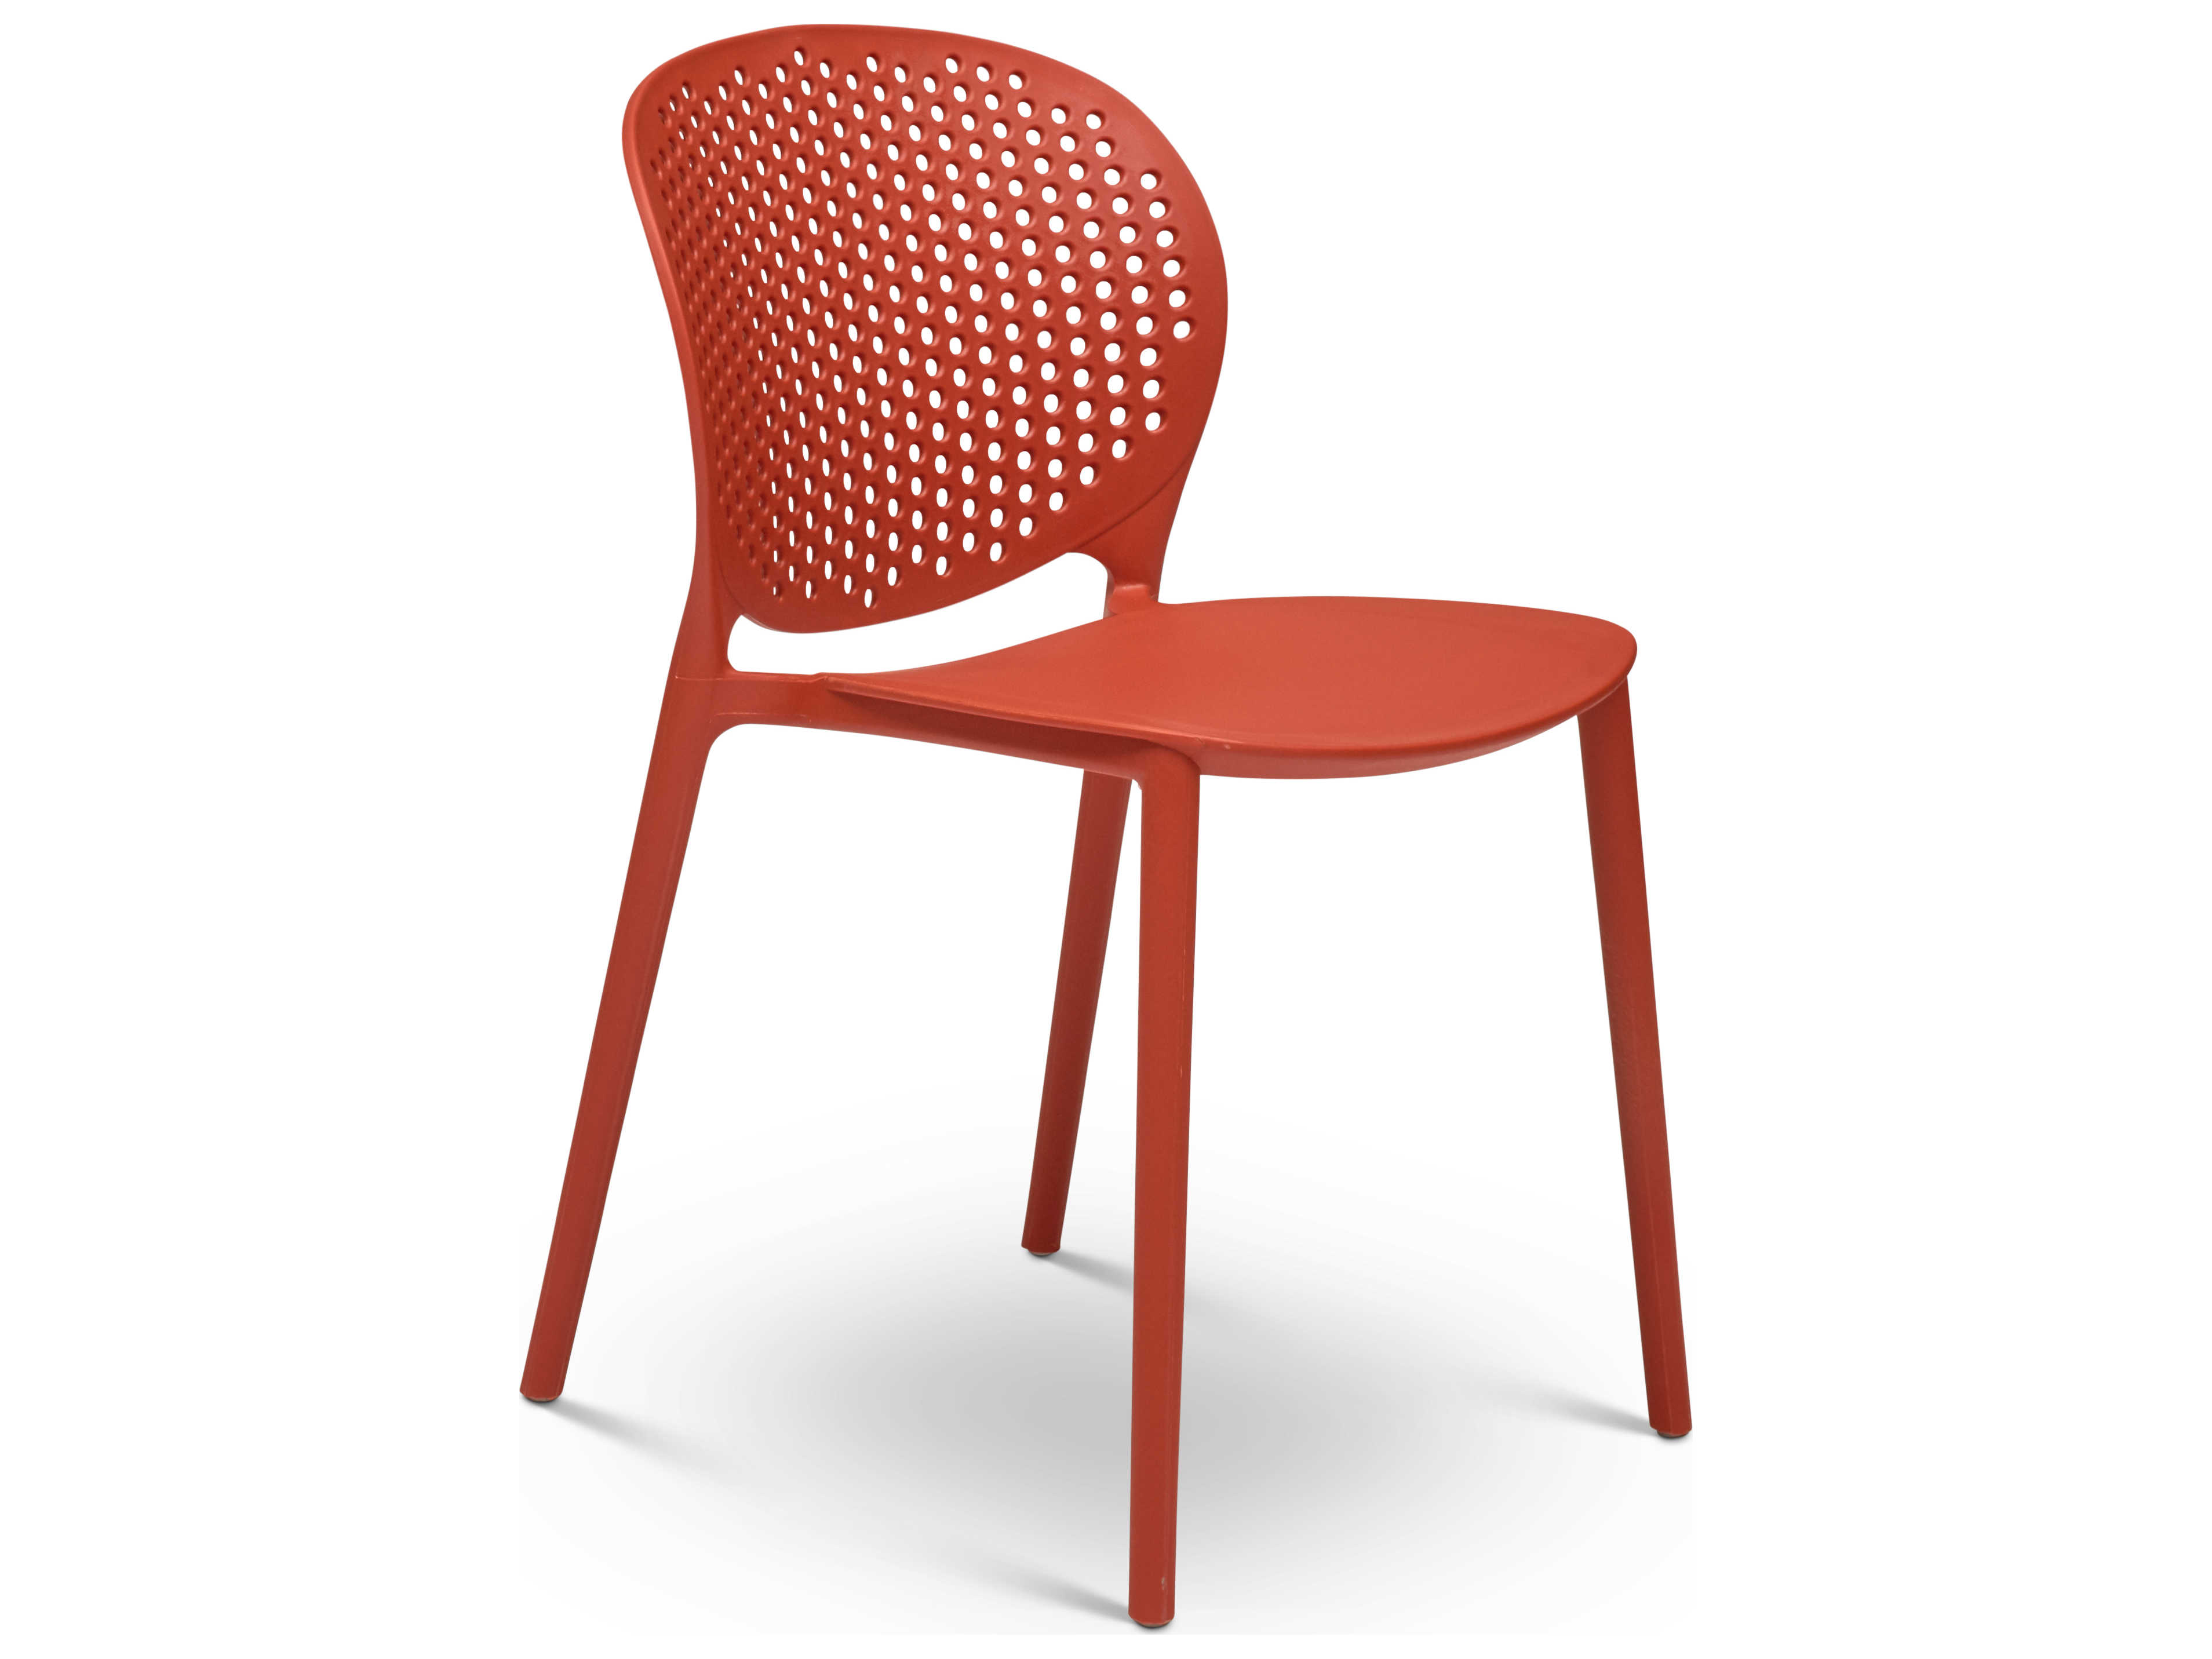 Plastic Seat Covers For Dining Room Chairs Uk